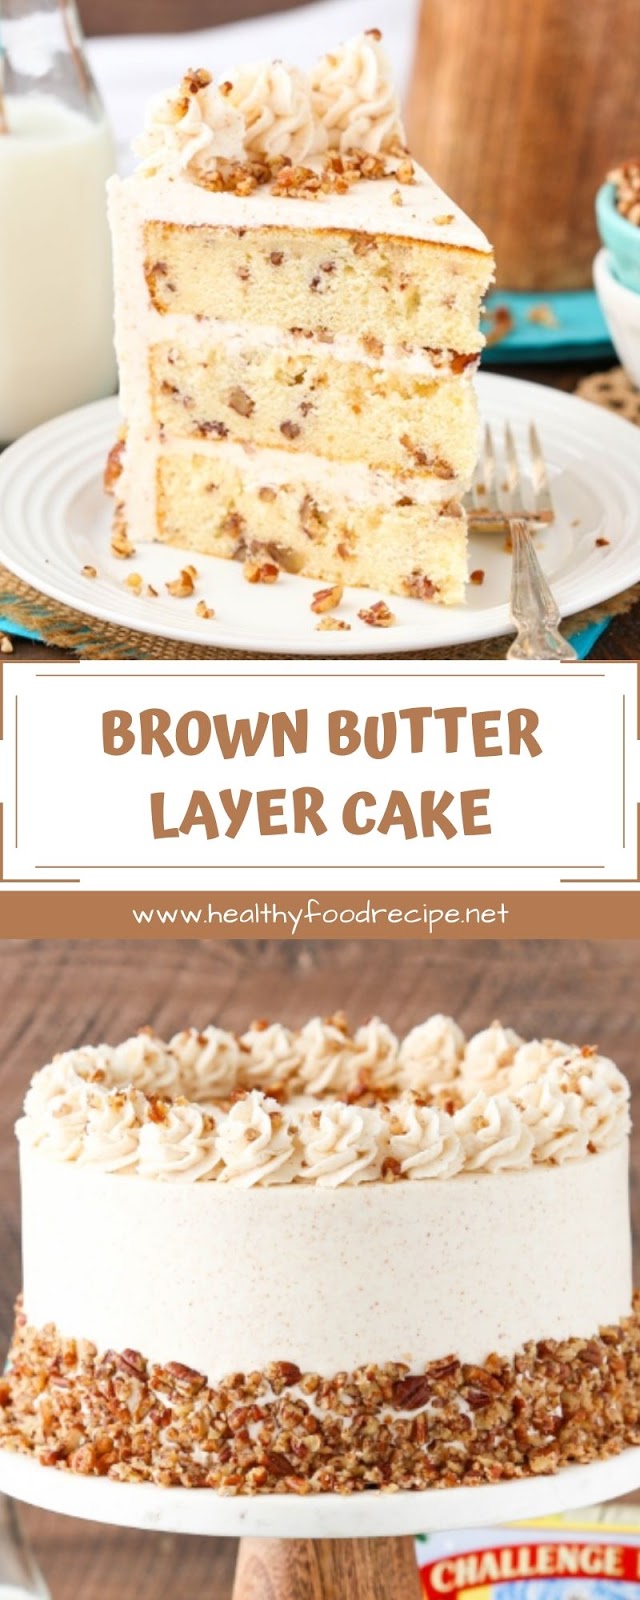 BROWN BUTTER LAYER CAKE